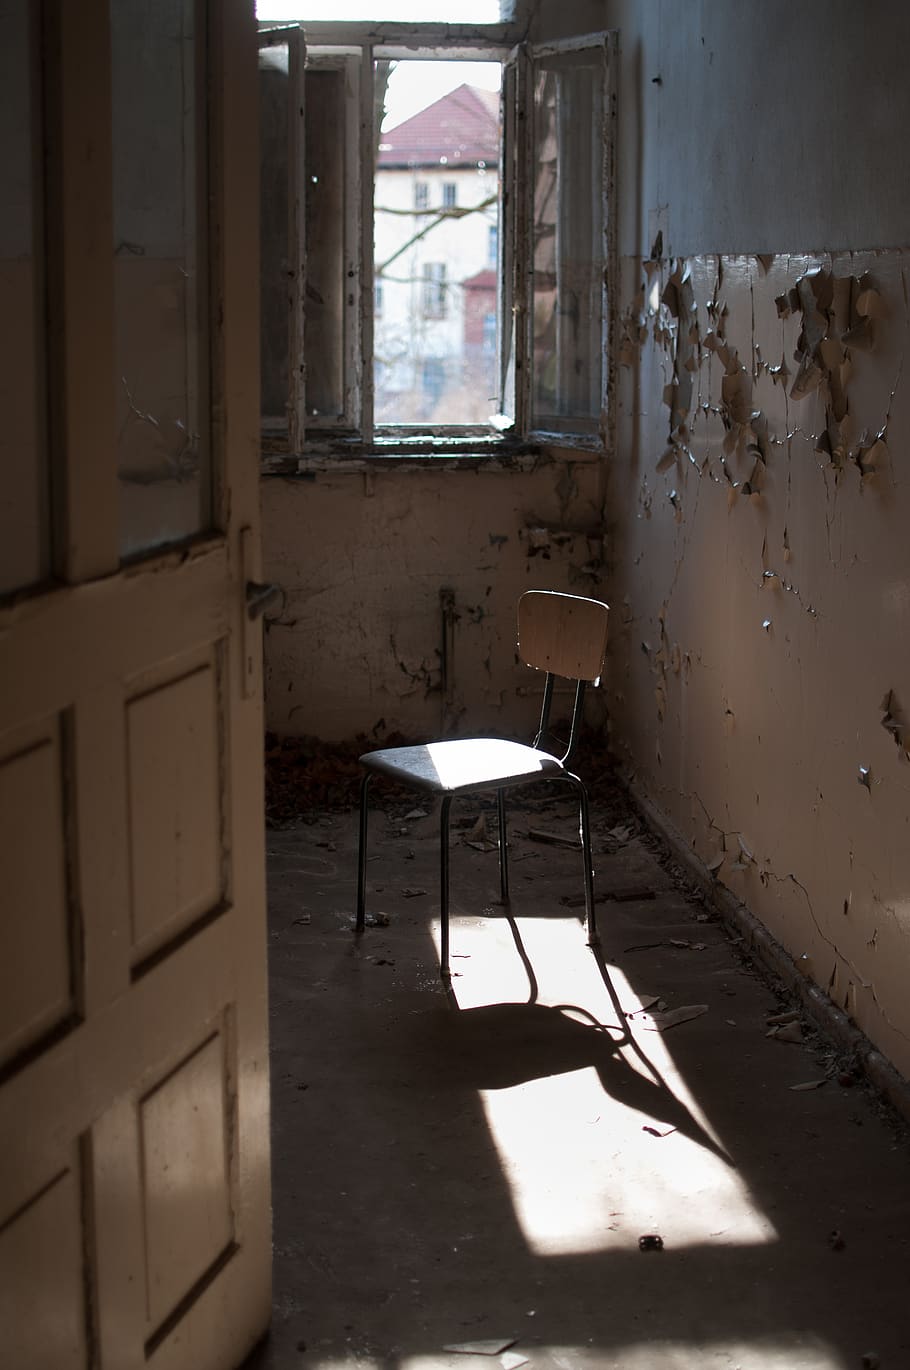 indoors, architecture, abandoned, room, house, window, day, domestic room, building, seat